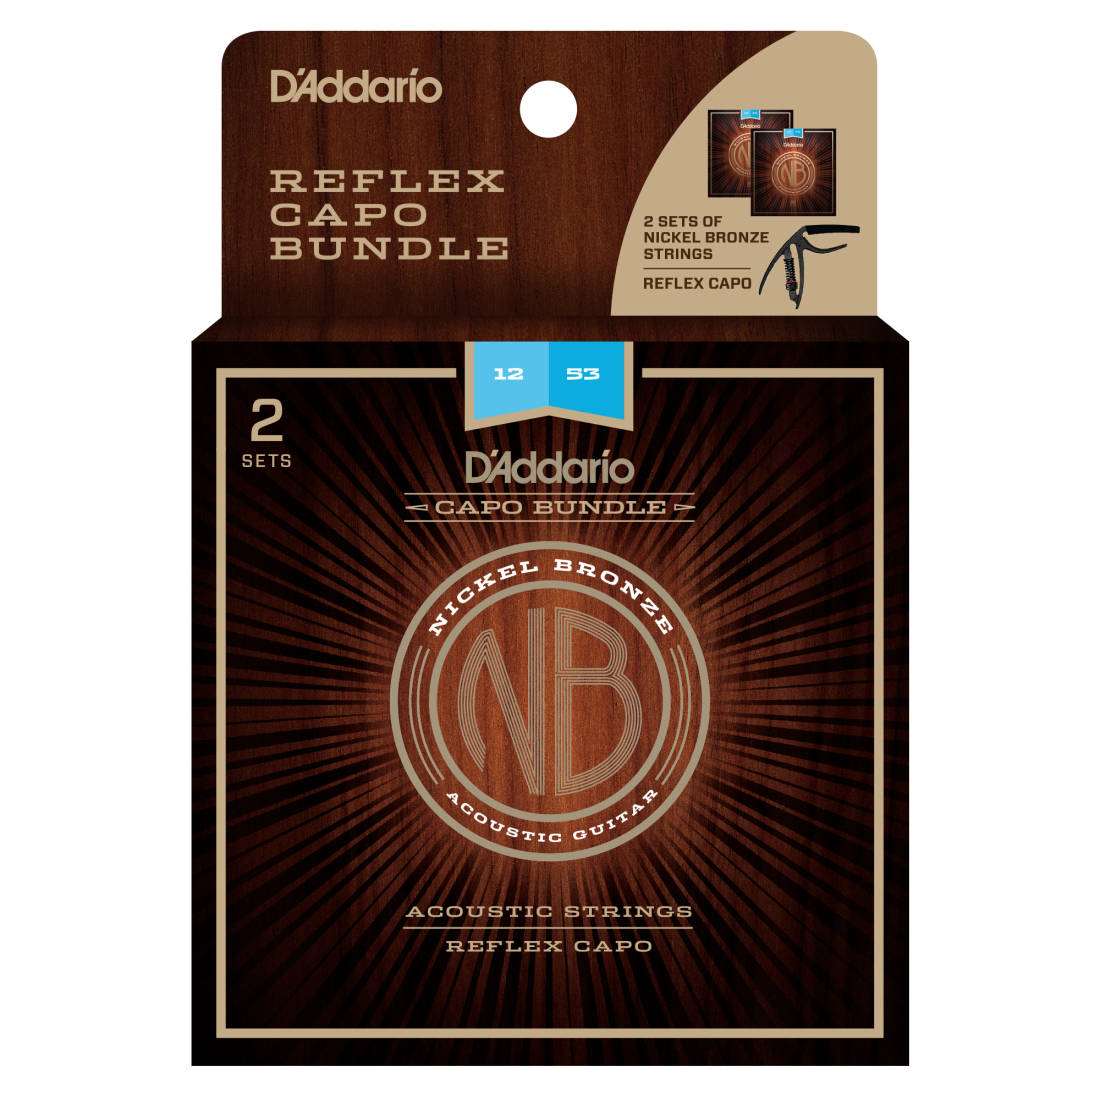 NB1253 Nickel Bronze Acoustic Strings (2 Pack) with Reflex Capo